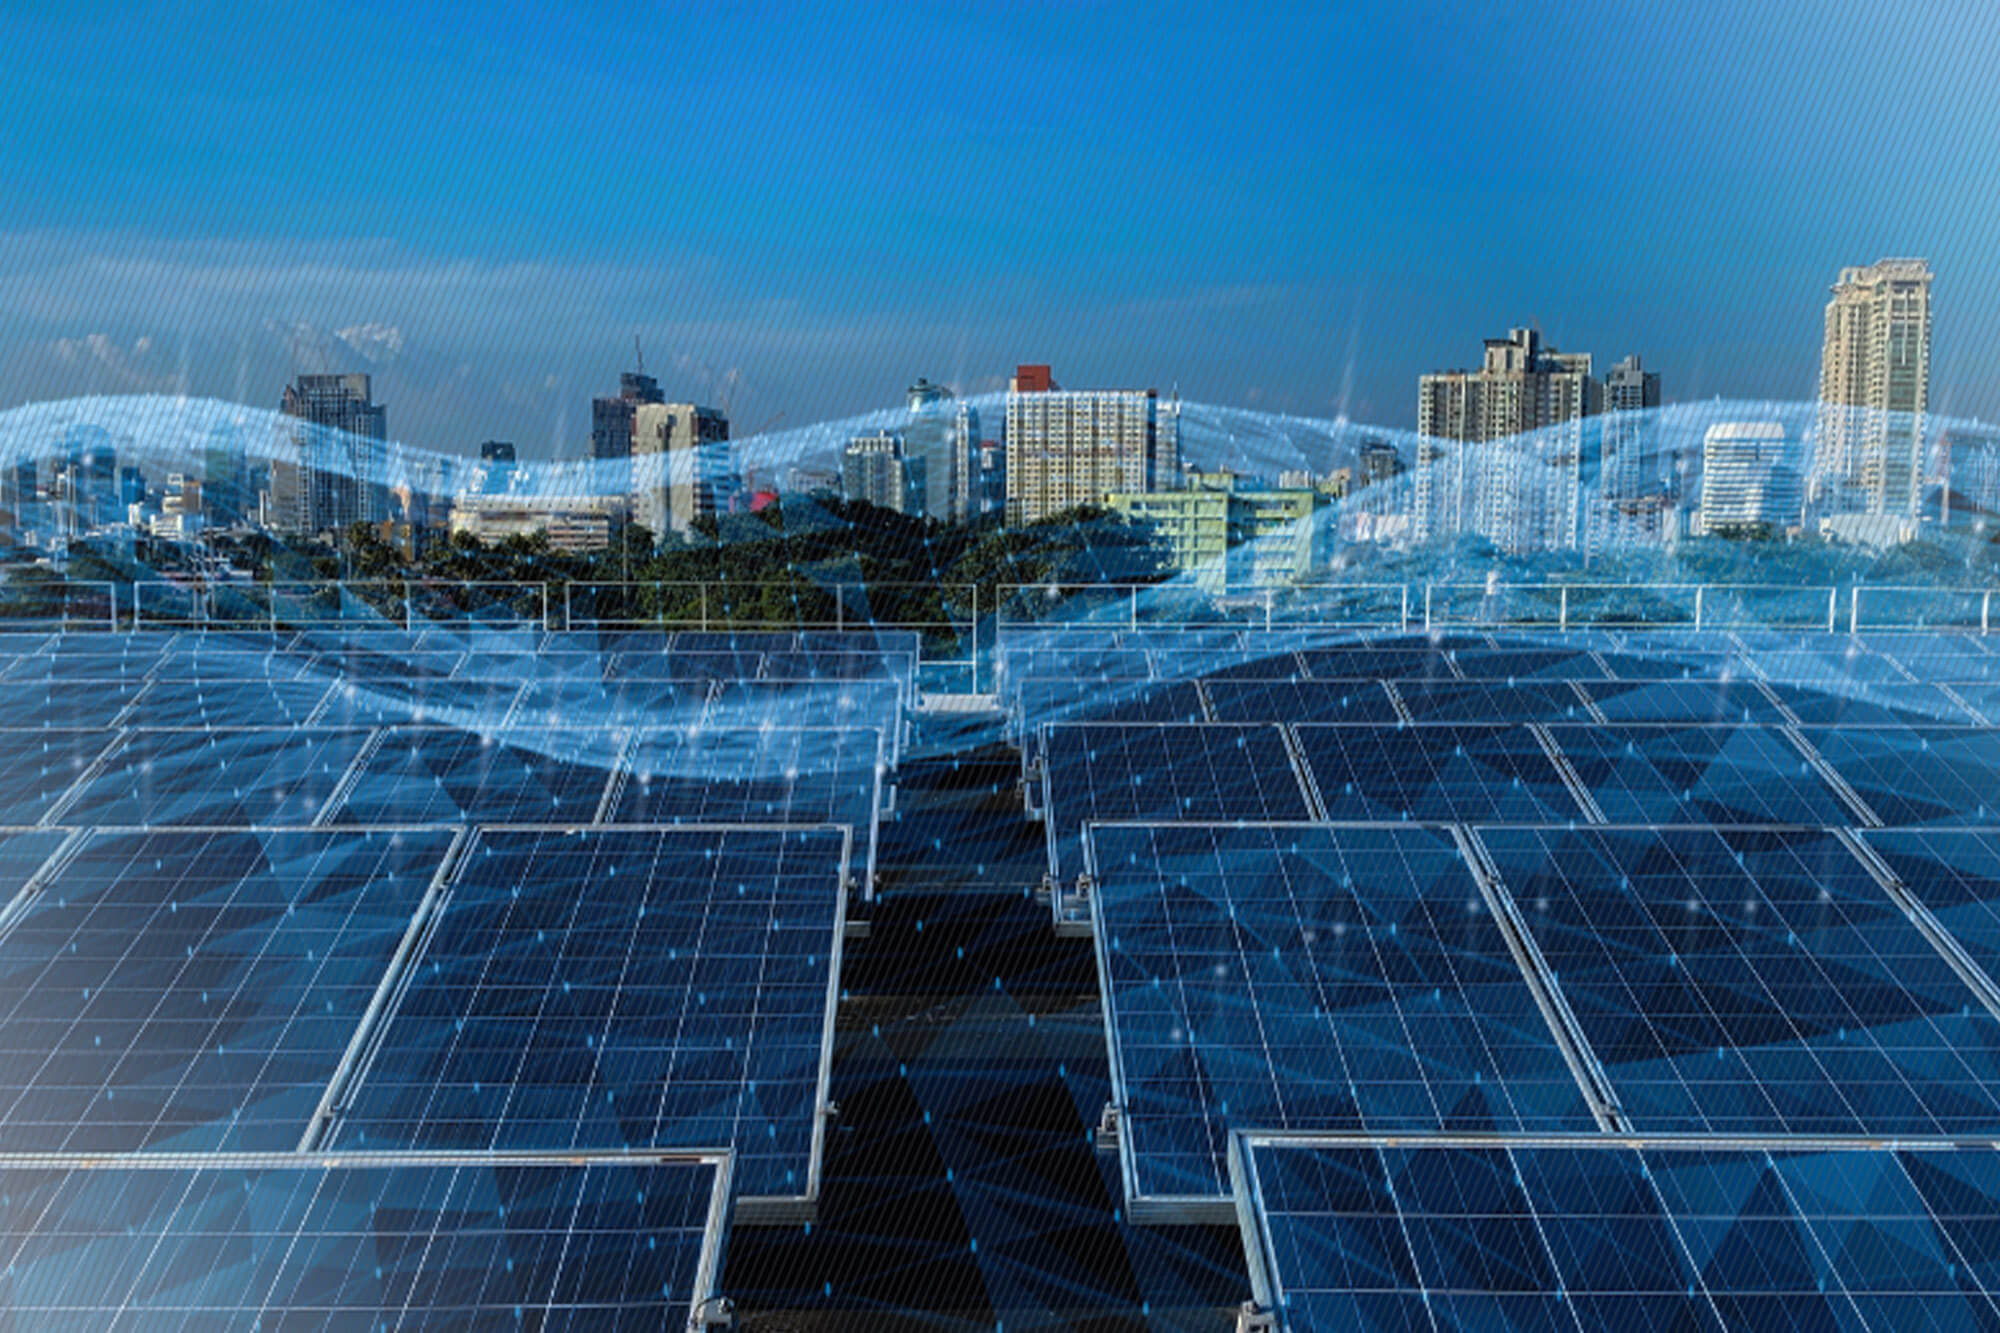 Featured image: Solar panels on the ground with a city skyline in the background - Read full post: Digital Experience Journey